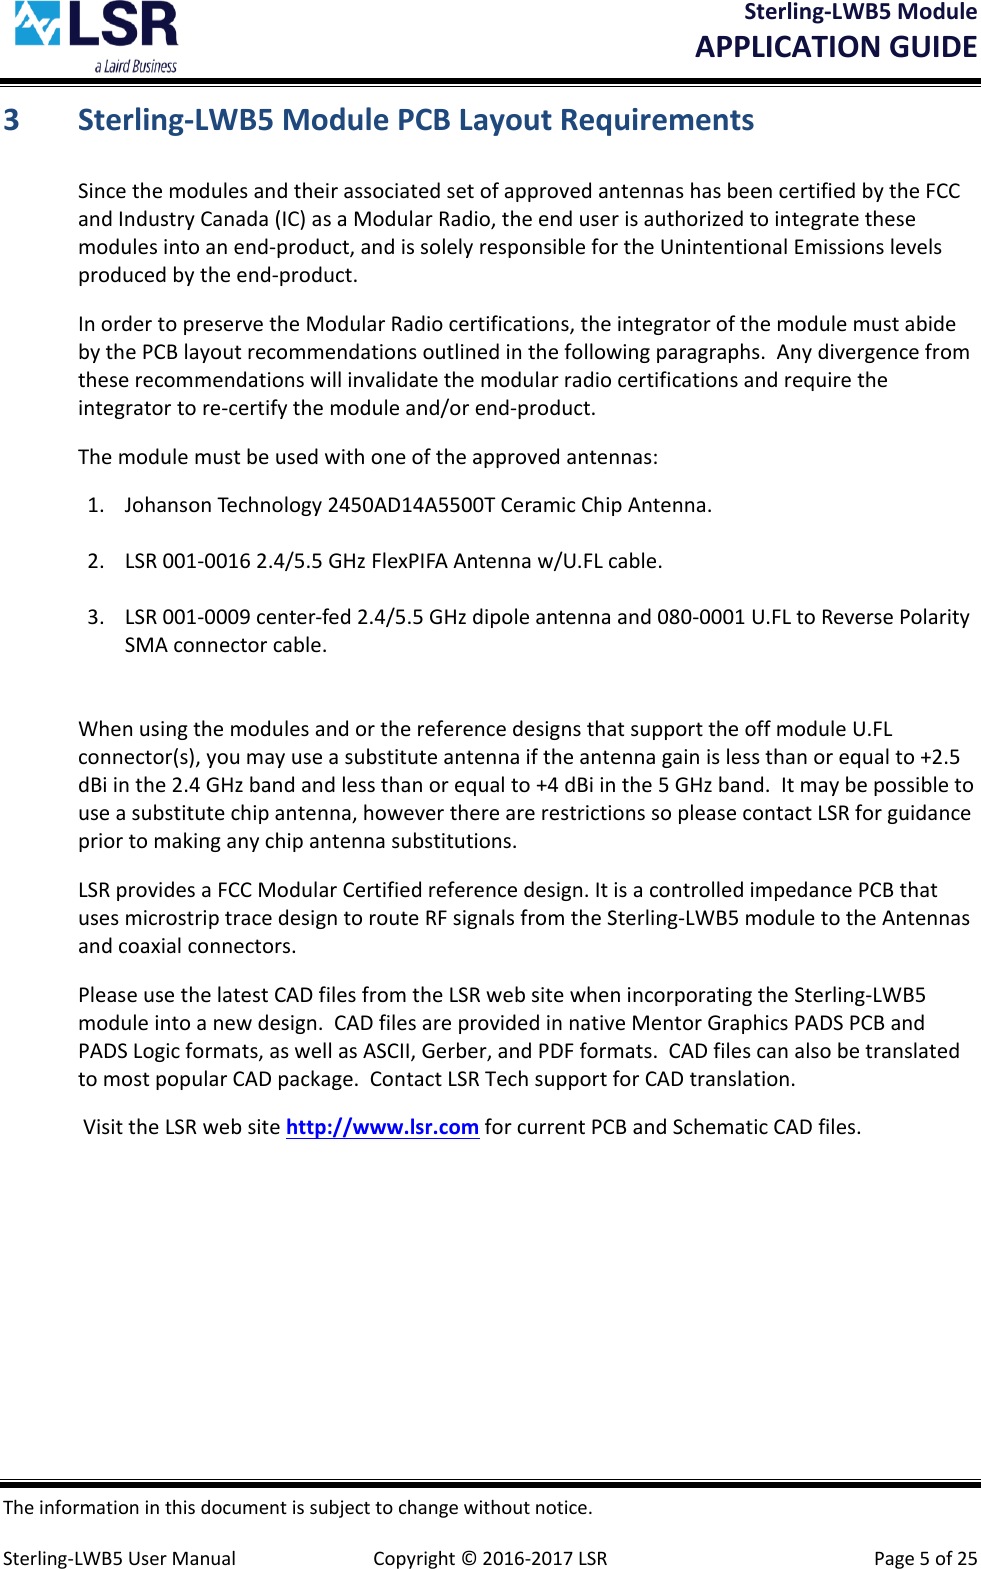 Sterling-LWB5 Module       APPLICATION GUIDE  The information in this document is subject to change without notice.  Sterling-LWB5 User Manual  Copyright © 2016-2017 LSR  Page 5 of 25 3 Sterling-LWB5 Module PCB Layout Requirements Since the modules and their associated set of approved antennas has been certified by the FCC and Industry Canada (IC) as a Modular Radio, the end user is authorized to integrate these modules into an end-product, and is solely responsible for the Unintentional Emissions levels produced by the end-product. In order to preserve the Modular Radio certifications, the integrator of the module must abide by the PCB layout recommendations outlined in the following paragraphs.  Any divergence from these recommendations will invalidate the modular radio certifications and require the integrator to re-certify the module and/or end-product. The module must be used with one of the approved antennas:  1. Johanson Technology 2450AD14A5500T Ceramic Chip Antenna.  2. LSR 001-0016 2.4/5.5 GHz FlexPIFA Antenna w/U.FL cable.  3. LSR 001-0009 center-fed 2.4/5.5 GHz dipole antenna and 080-0001 U.FL to Reverse Polarity SMA connector cable.     When using the modules and or the reference designs that support the off module U.FL connector(s), you may use a substitute antenna if the antenna gain is less than or equal to +2.5 dBi in the 2.4 GHz band and less than or equal to +4 dBi in the 5 GHz band.  It may be possible to use a substitute chip antenna, however there are restrictions so please contact LSR for guidance prior to making any chip antenna substitutions. LSR provides a FCC Modular Certified reference design. It is a controlled impedance PCB that uses microstrip trace design to route RF signals from the Sterling-LWB5 module to the Antennas and coaxial connectors.     Please use the latest CAD files from the LSR web site when incorporating the Sterling-LWB5 module into a new design.  CAD files are provided in native Mentor Graphics PADS PCB and PADS Logic formats, as well as ASCII, Gerber, and PDF formats.  CAD files can also be translated to most popular CAD package.  Contact LSR Tech support for CAD translation.   Visit the LSR web site http://www.lsr.com for current PCB and Schematic CAD files.    